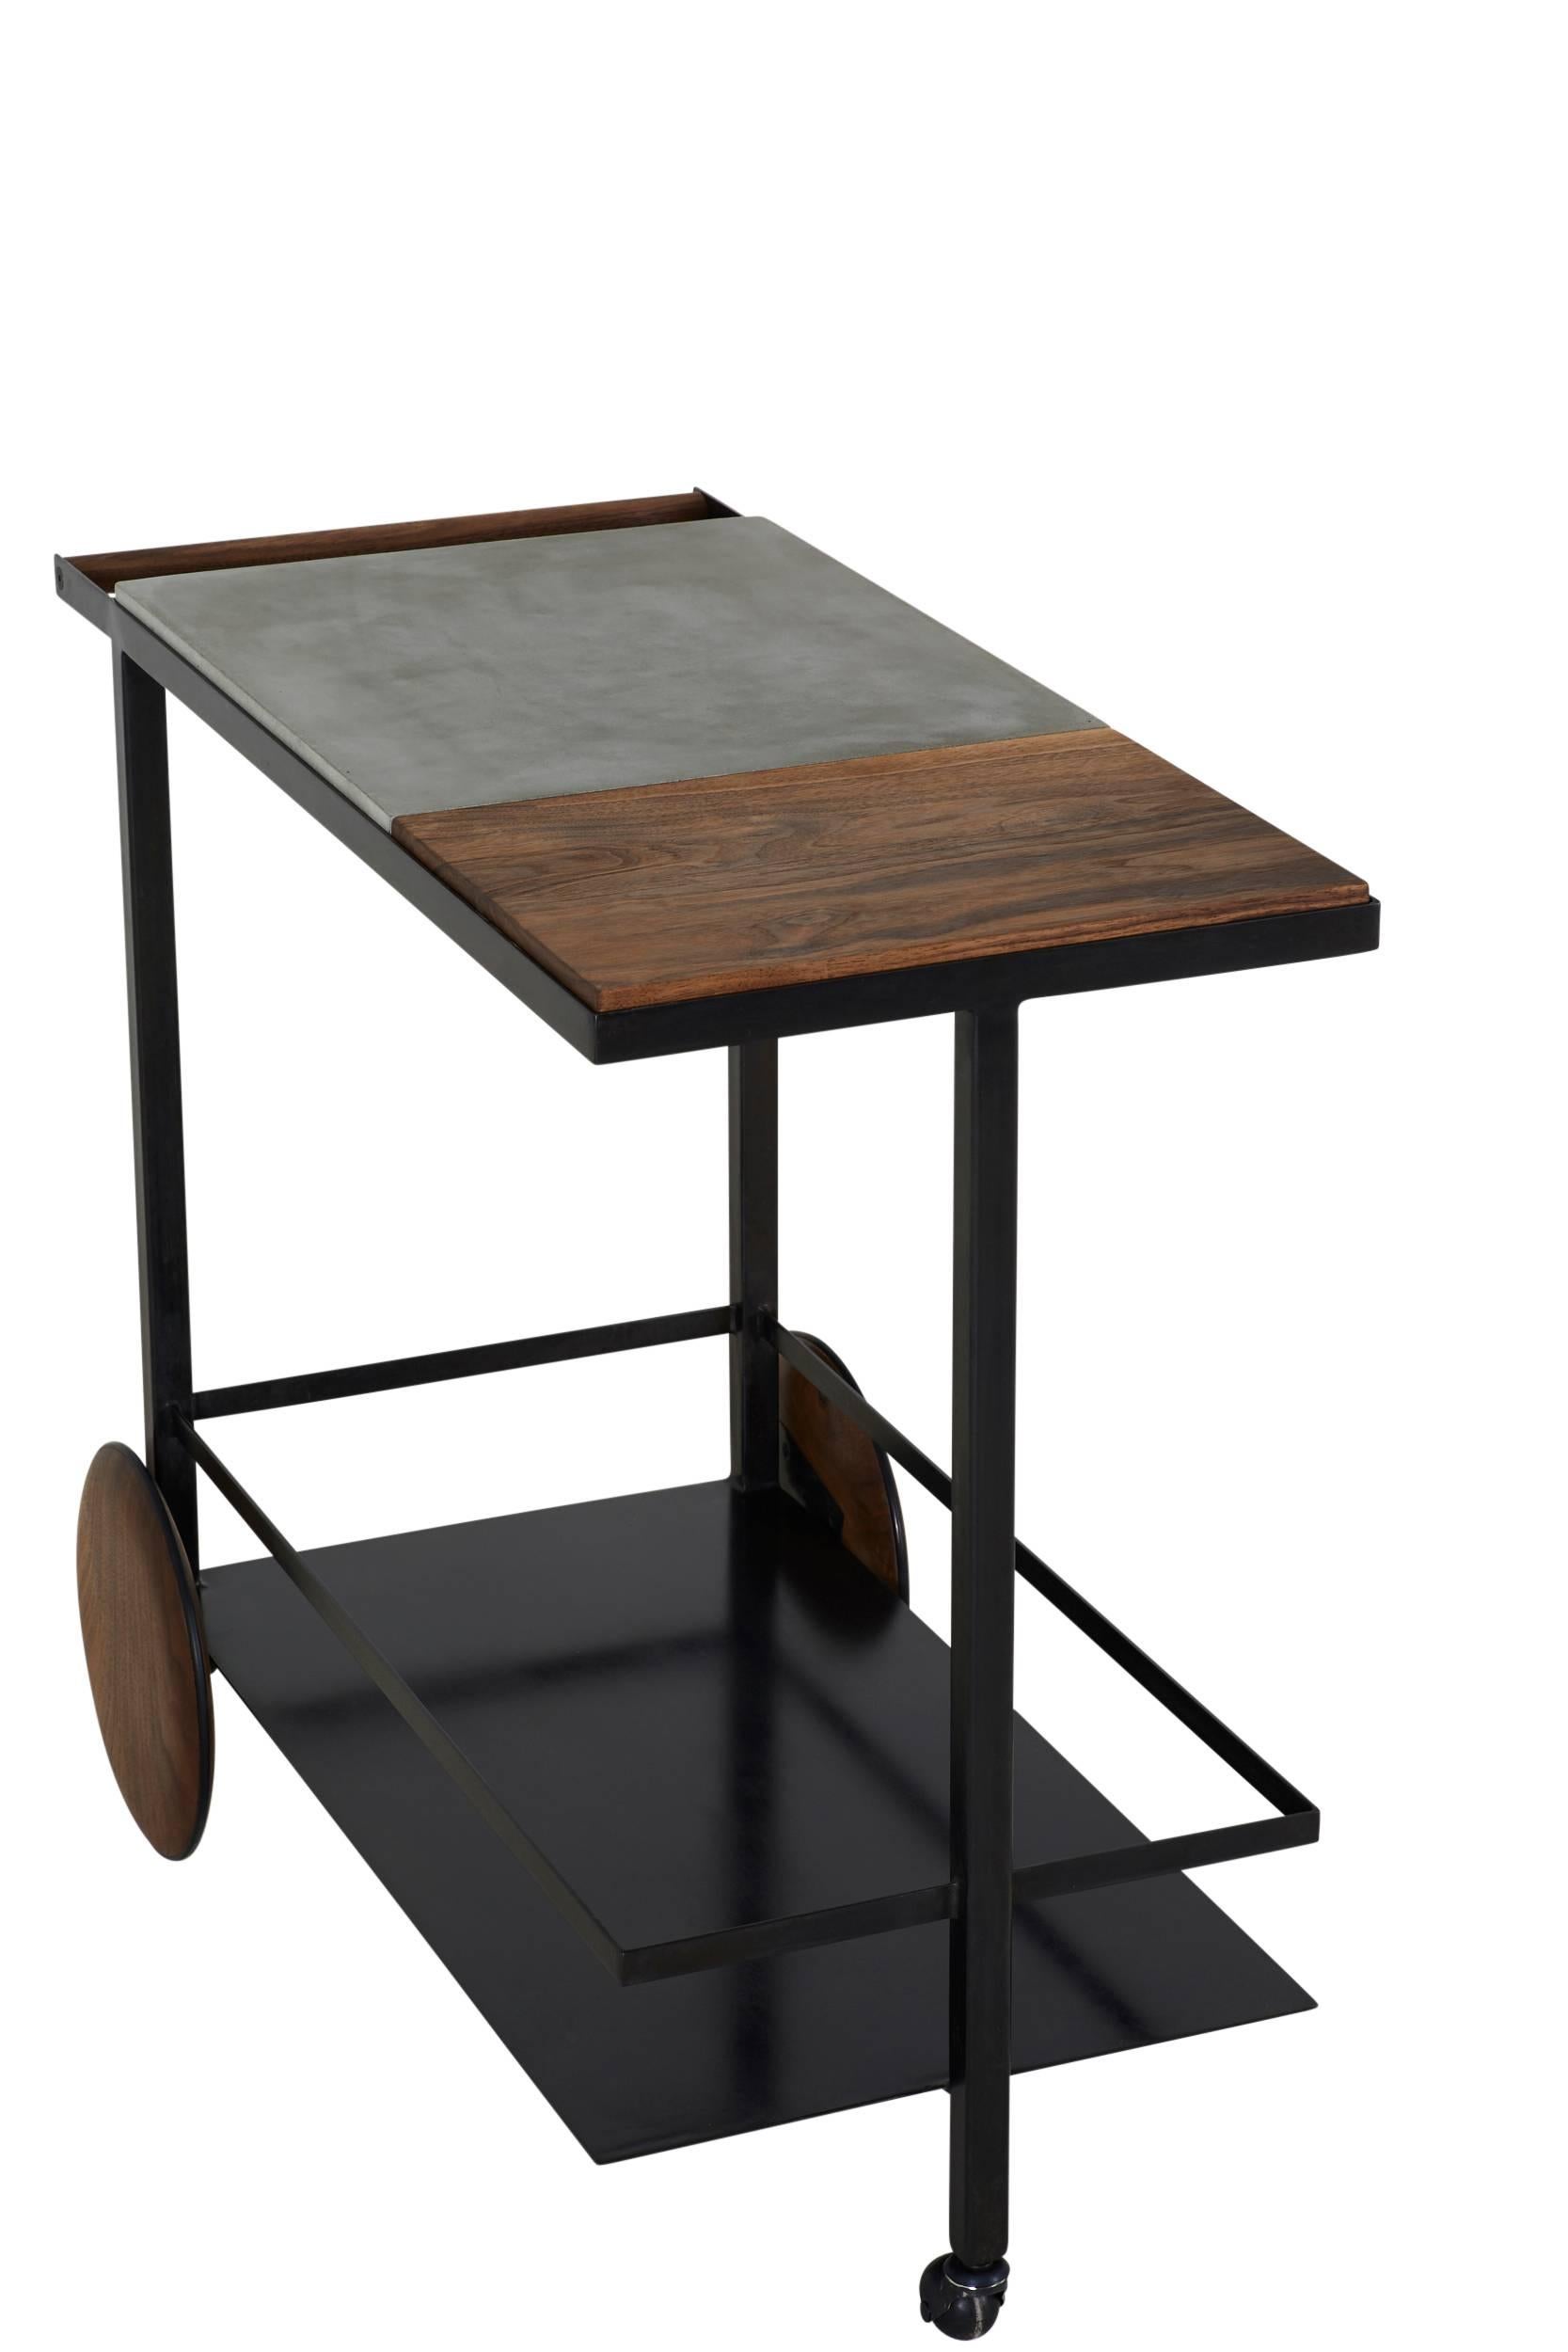 American Blackened Steel, Cast-Concrete and Solid Walnut Wood Handsome Bar Cart For Sale